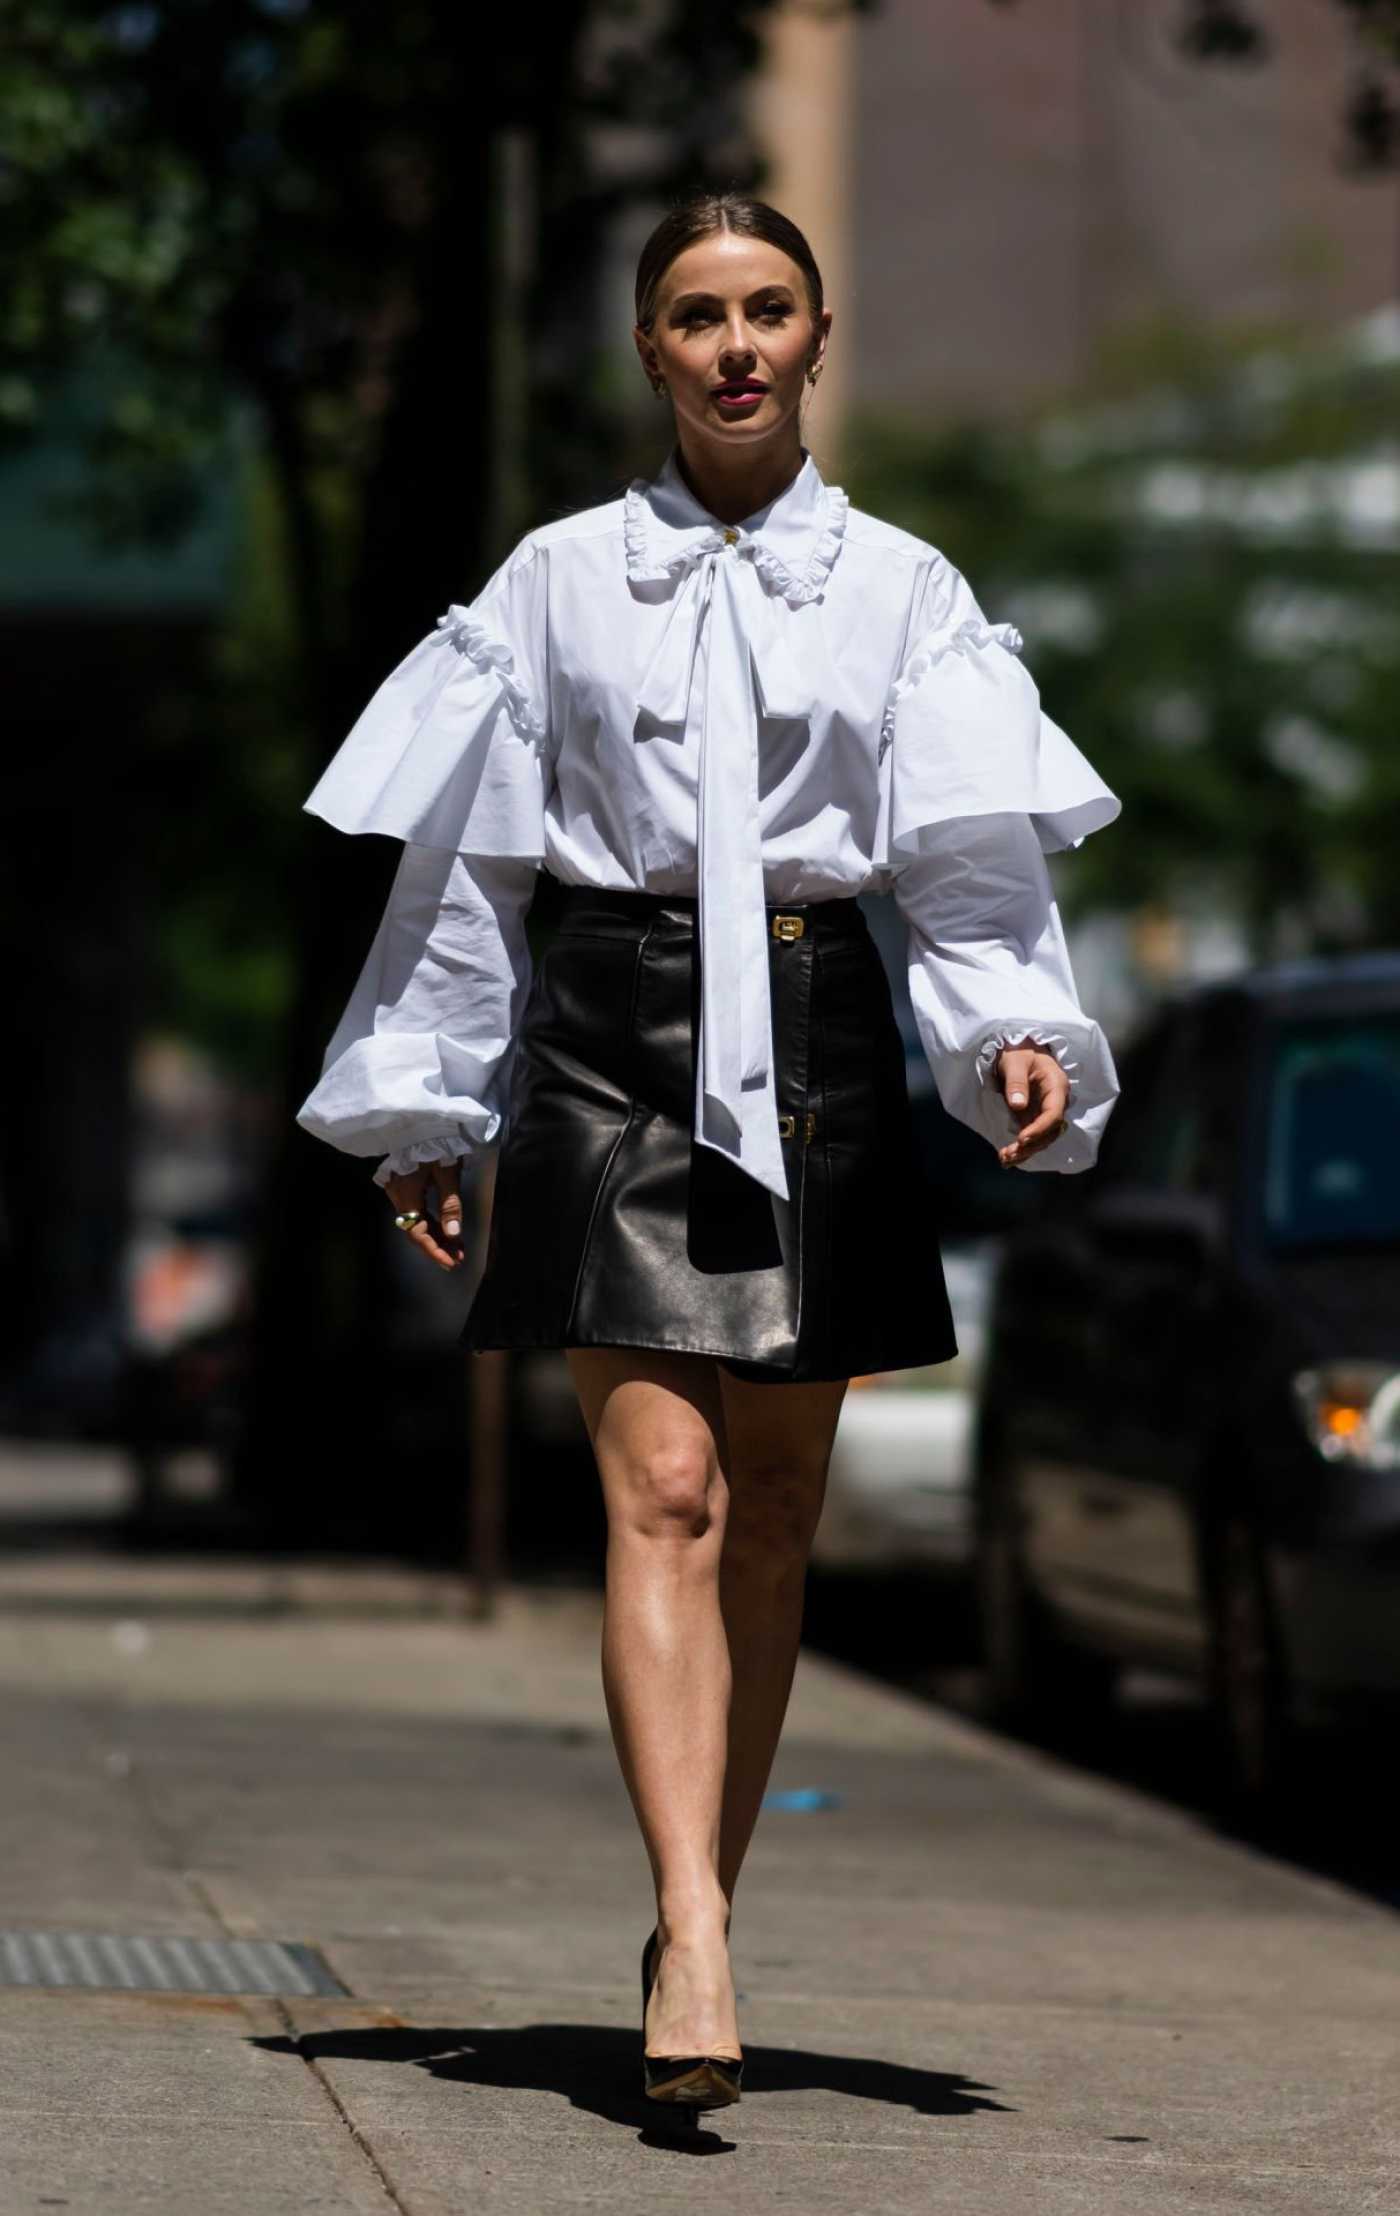 Julianne Hough in a White Blouse Was Spotted Out in New York City 06/09/2022